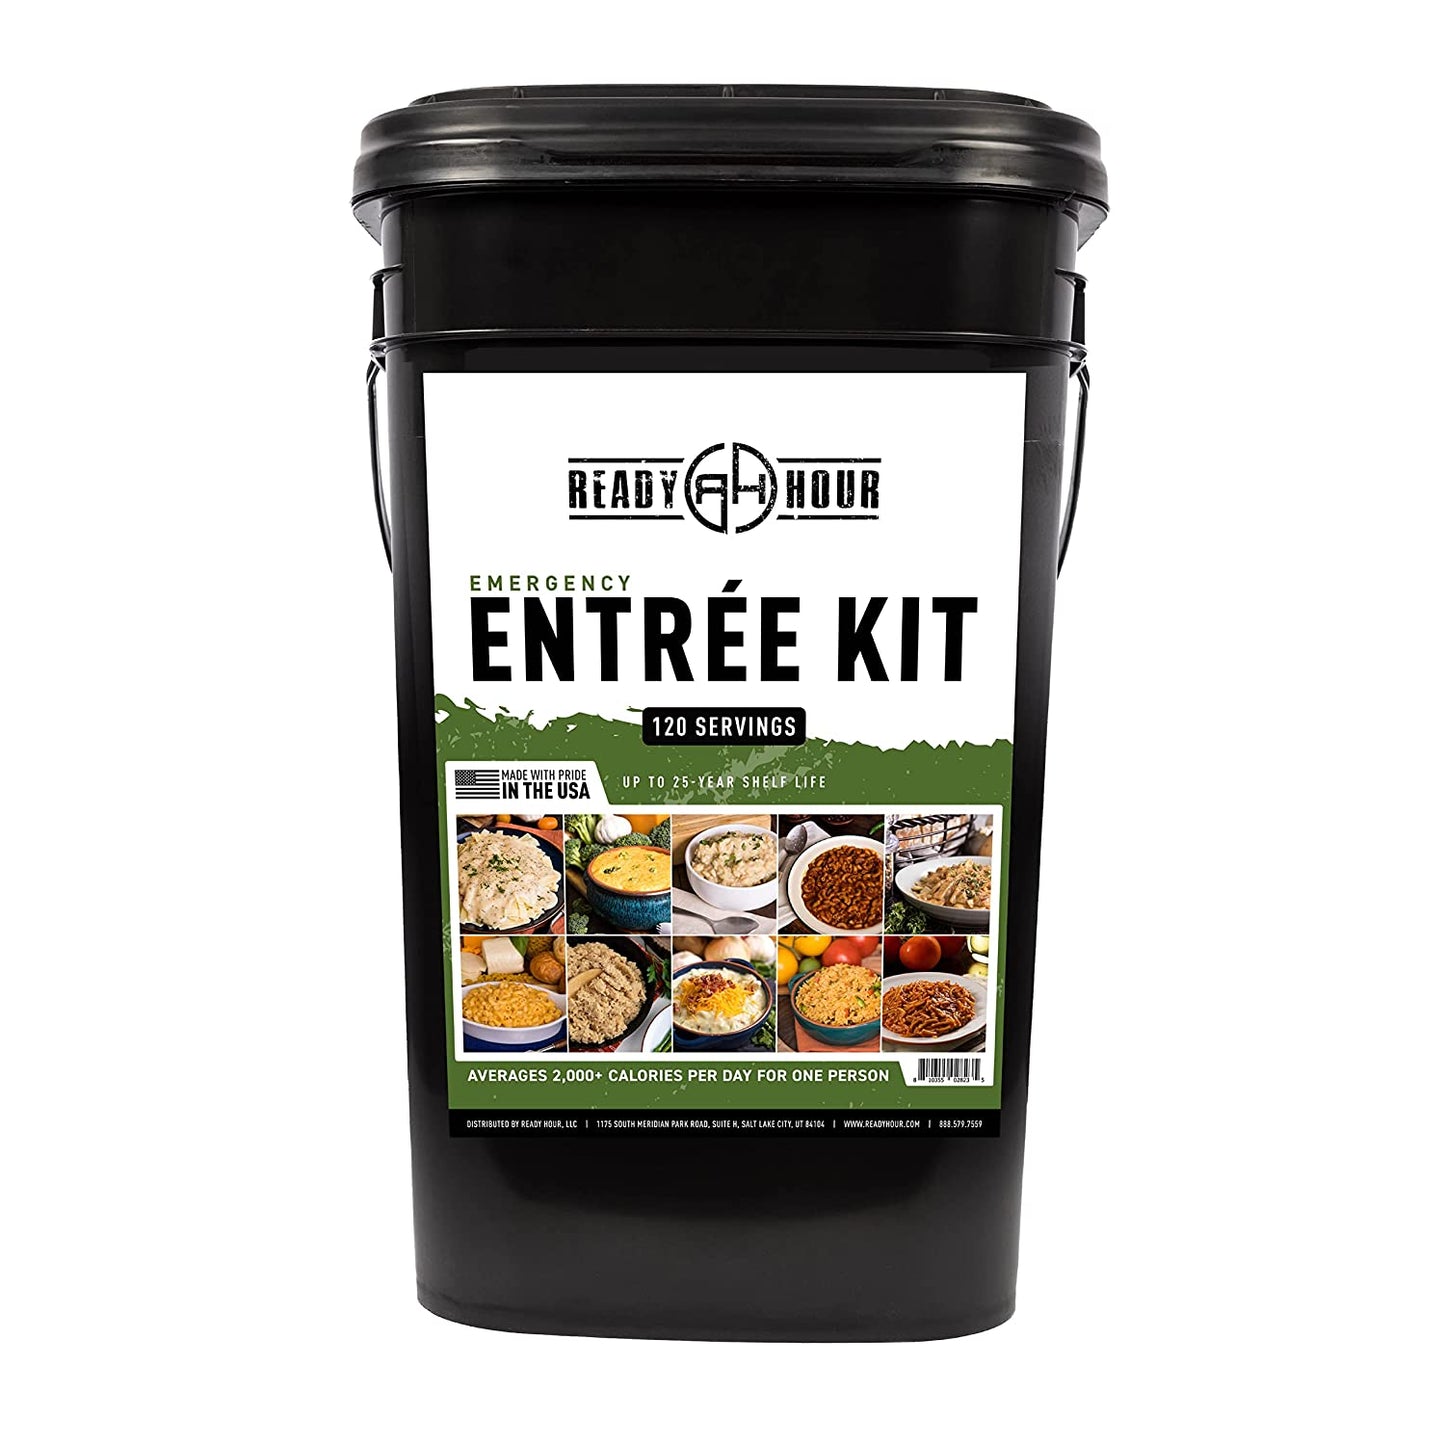 , Emergency Meal Entrées, Real Non-Perishable Meals, 25-Year Shelf Life, Portable Flood-Safe Container, 120 Servings